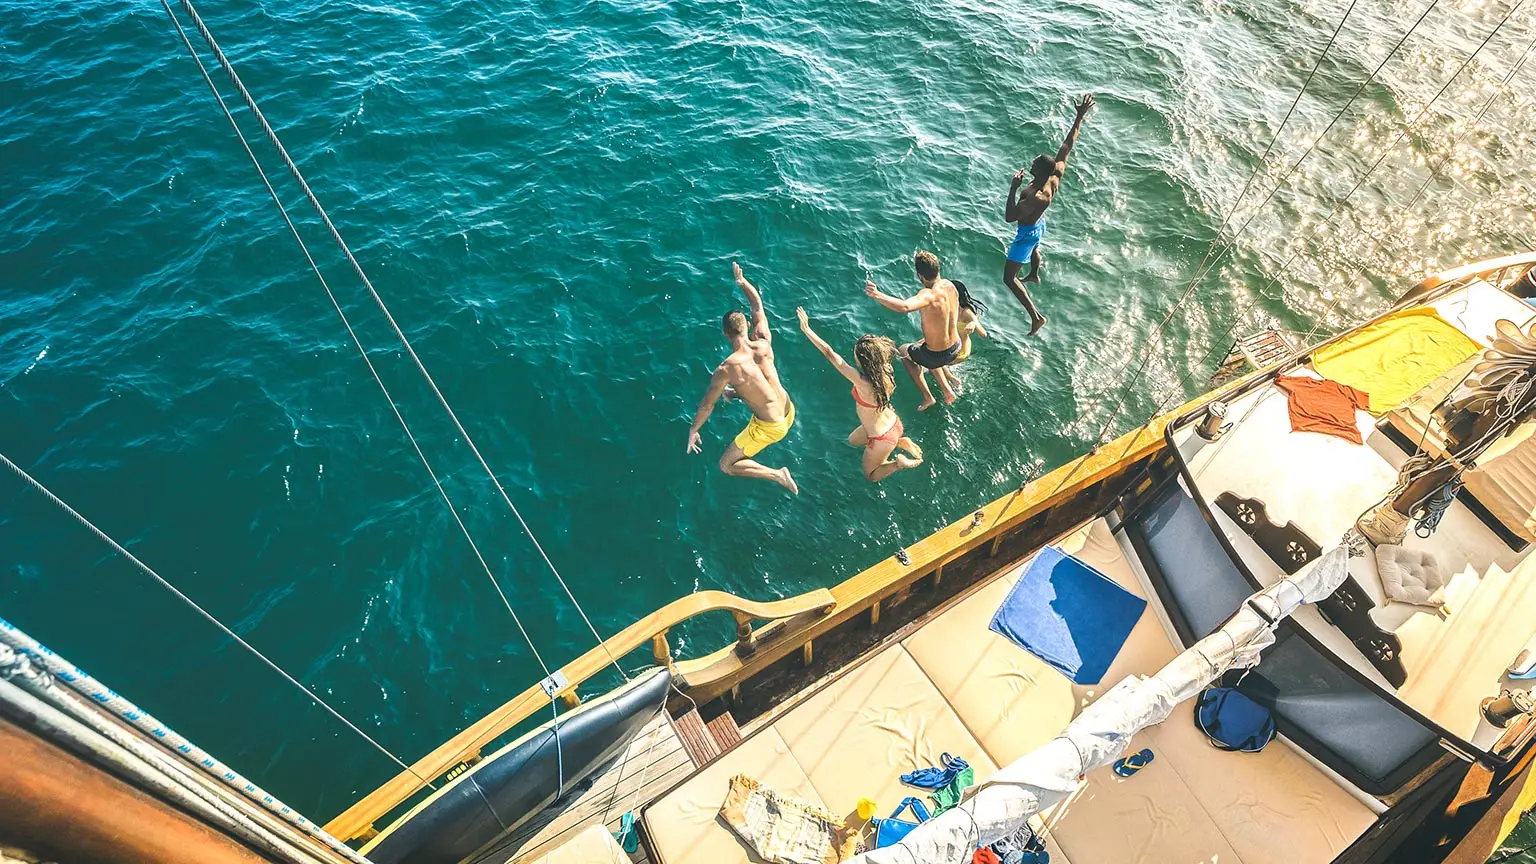 People jumping off a boat in Italy into the Mediterranean